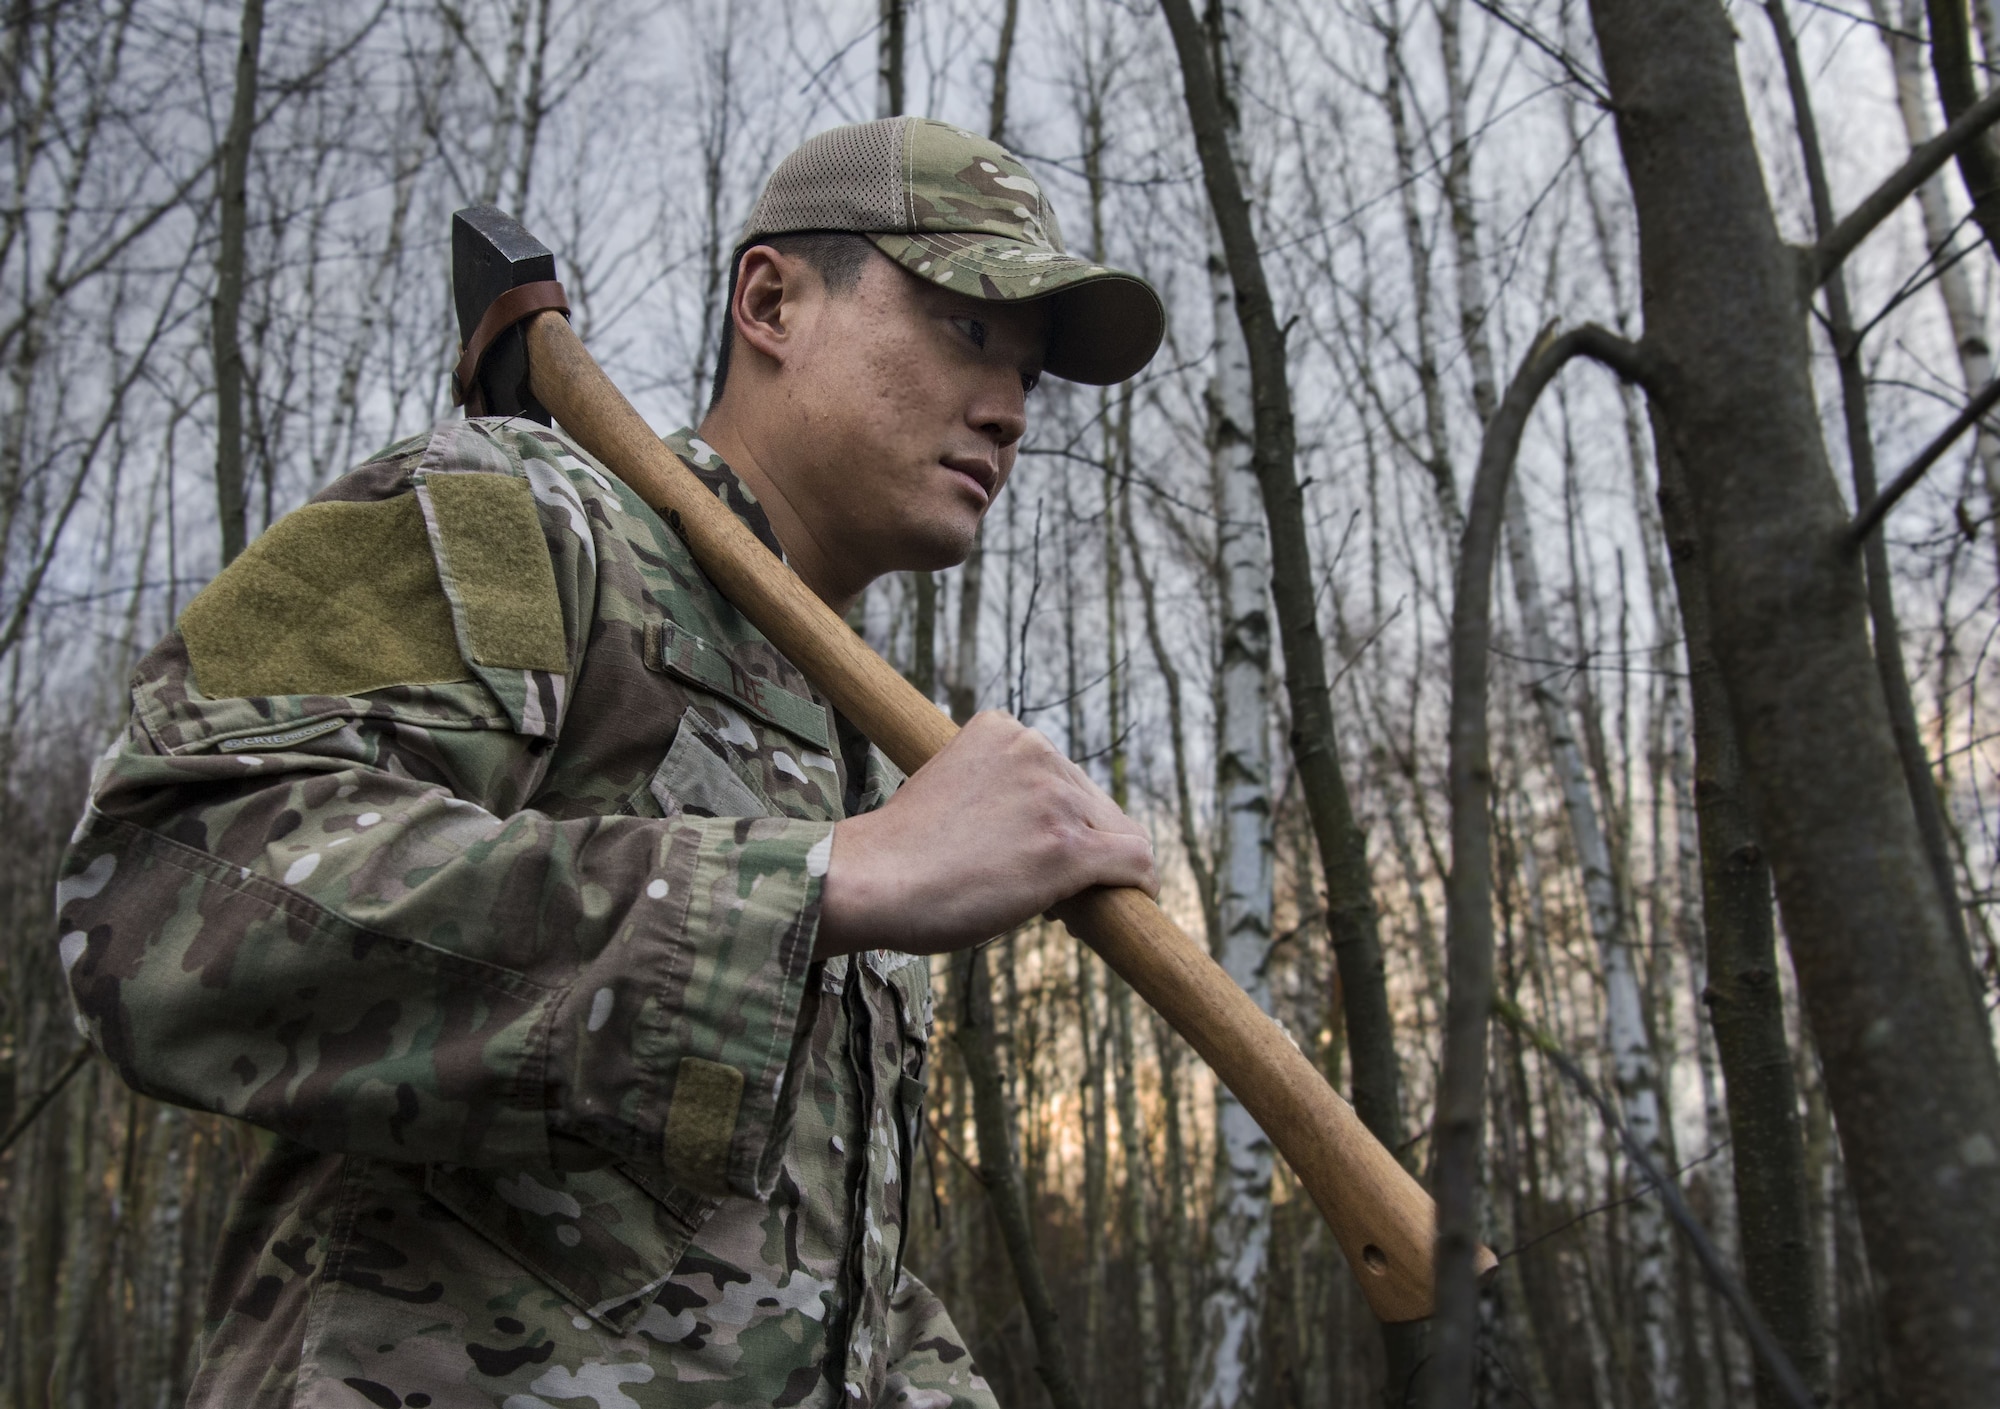 U.S. Air Force TSgt. Lee Young, 86th Operations Group Survival, Evasion, Resistance, and Escape noncommissioned officer in charge, walks through the woods on Ramstein Air Base, Germany, Jan. 11, 2018. Lee, who has trained approximately 2,000 personnel on how to stay alive in austere conditions, believes that survival is 10 percent physical and 90 percent mental. (U.S. Air Force illustration by Senior Airman Elizabeth Baker)